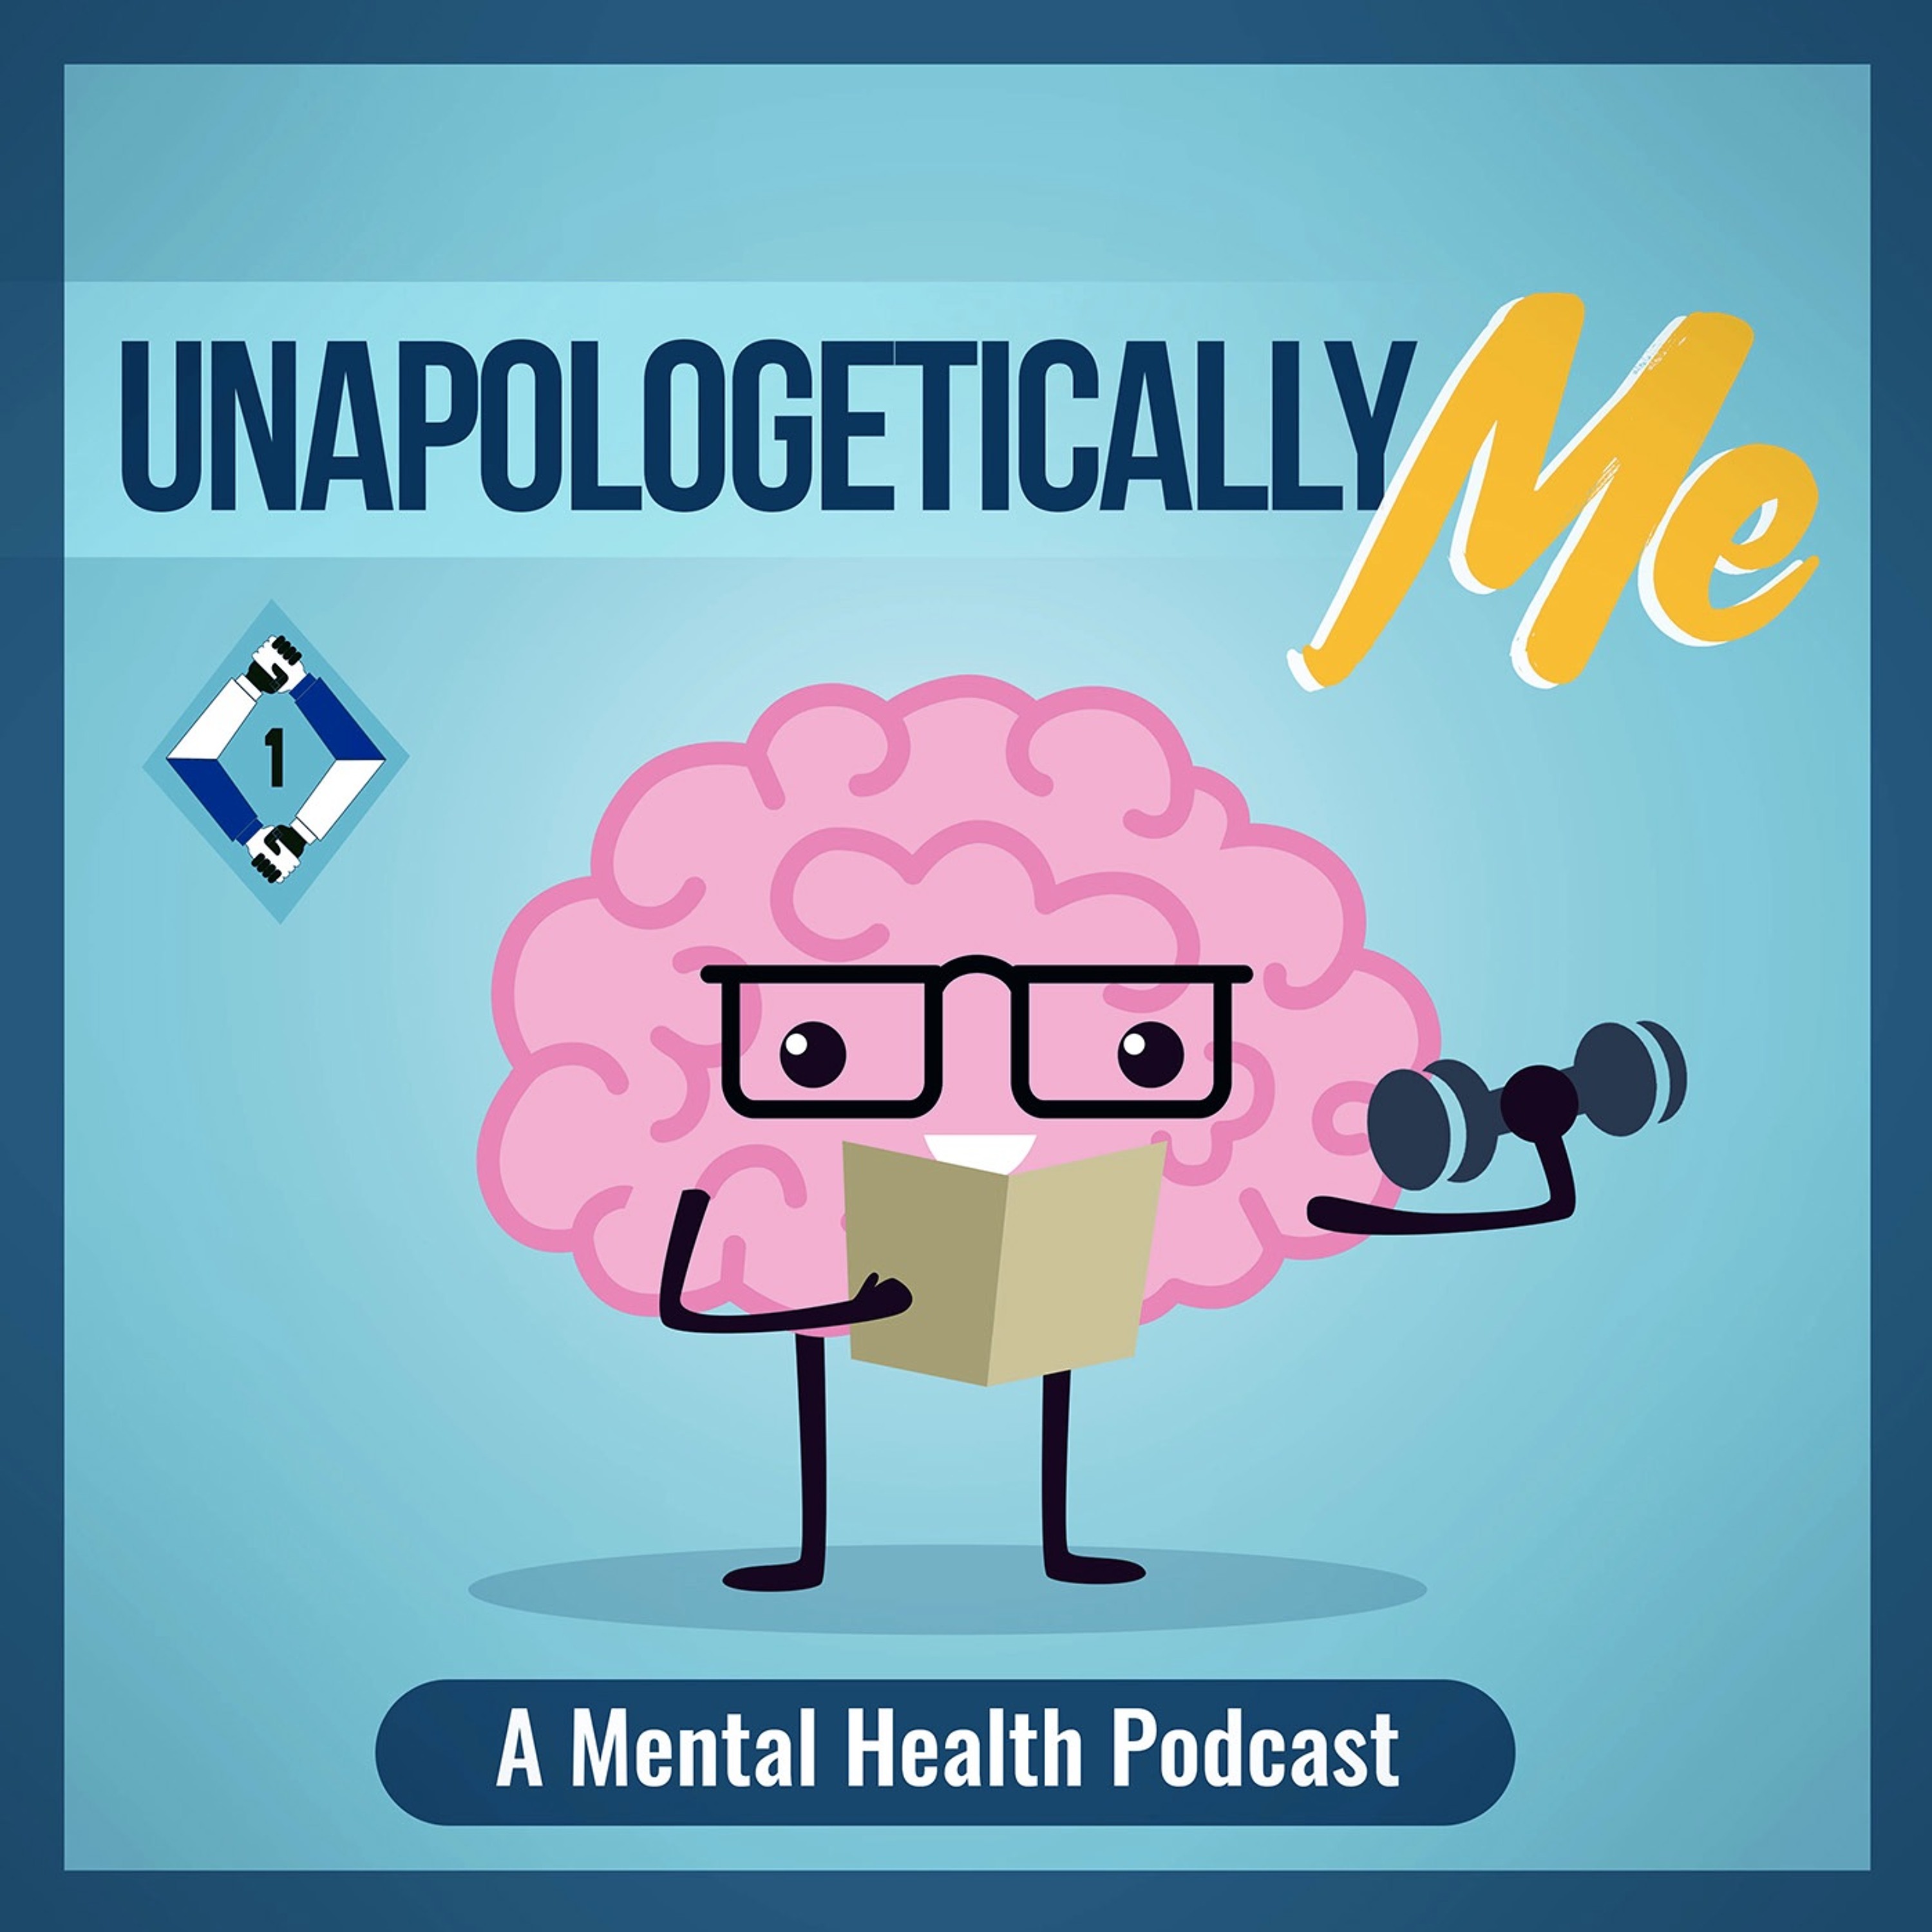 Unapologetically Me: A Mental Health Podcast - Health Tips Comp #5